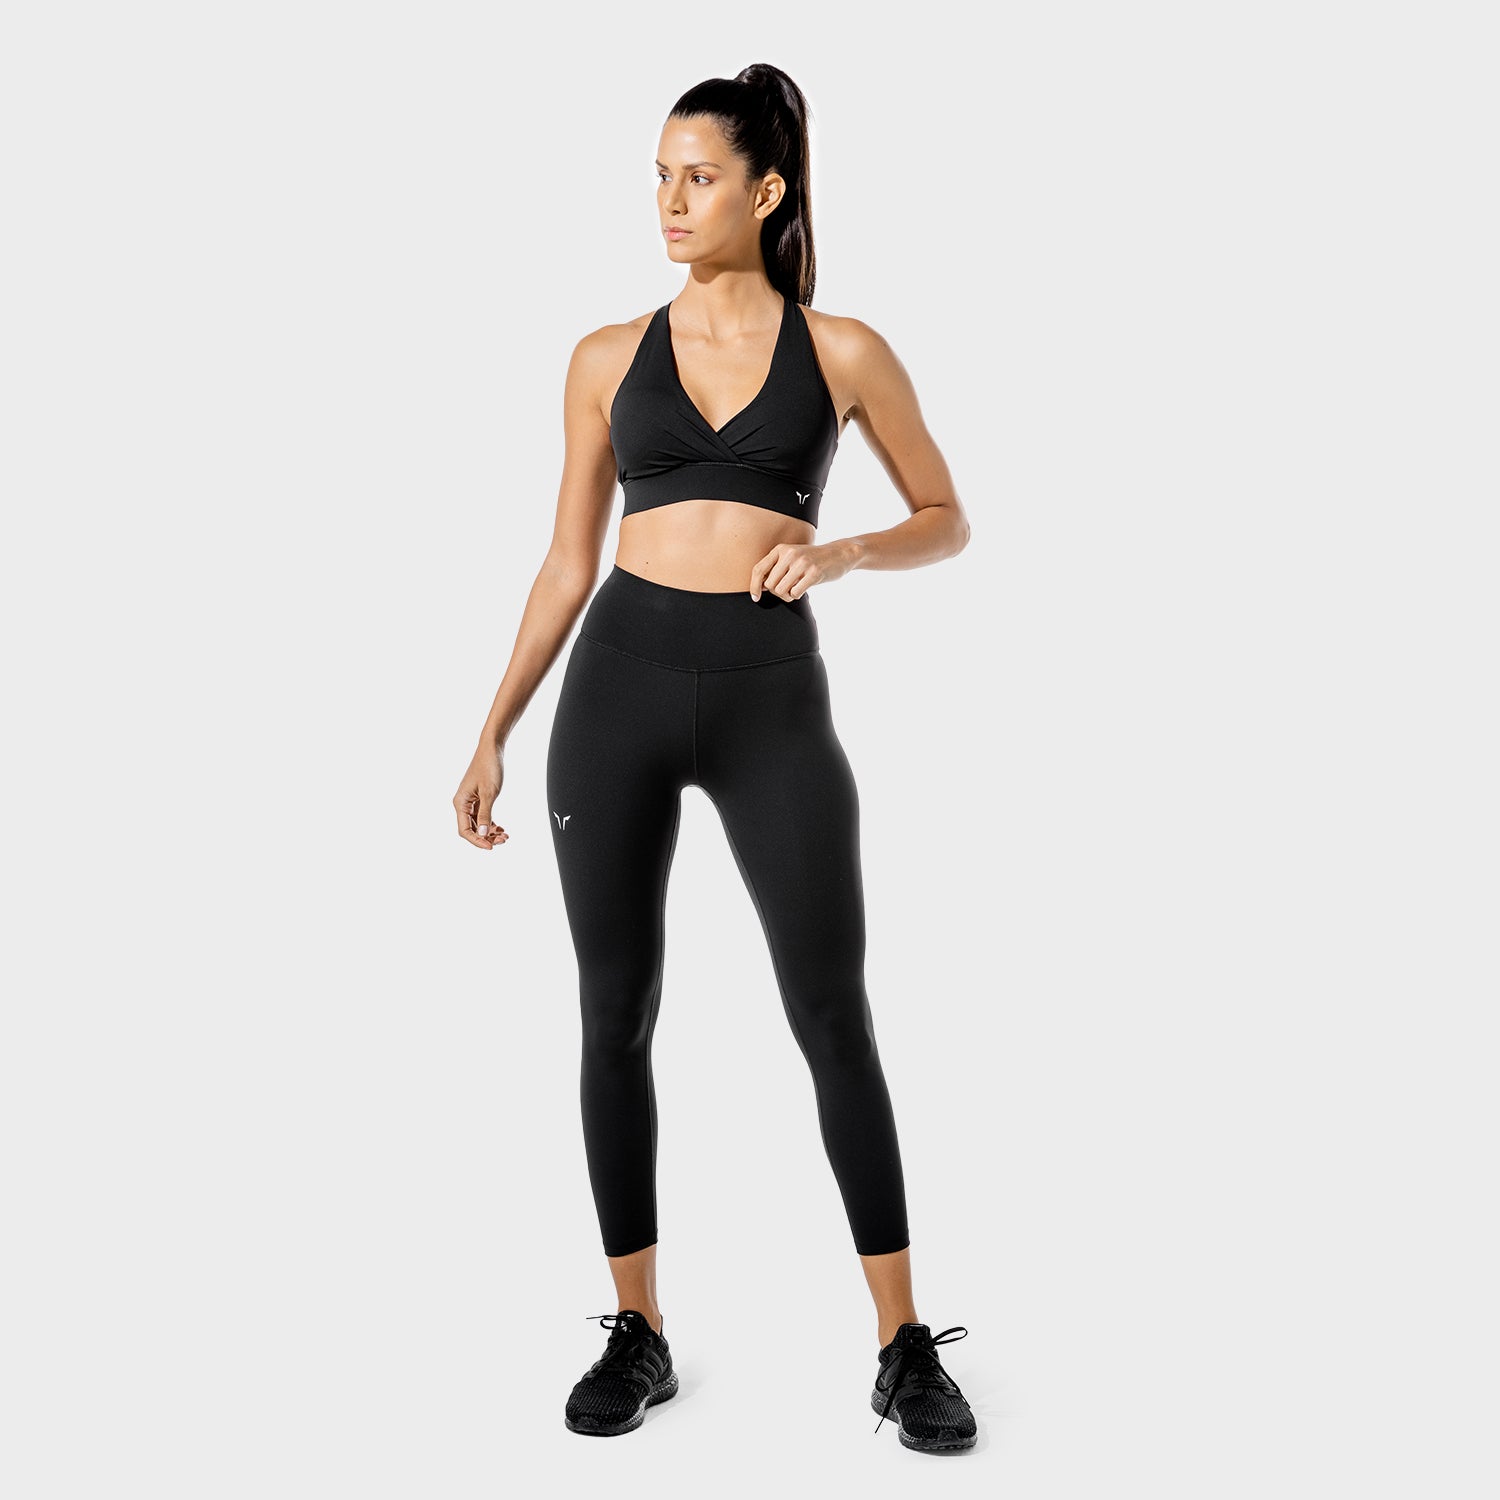 squatwolf-workout-clothes-womens-fitness-7-8-leggings-black-gym-leggings-for-women